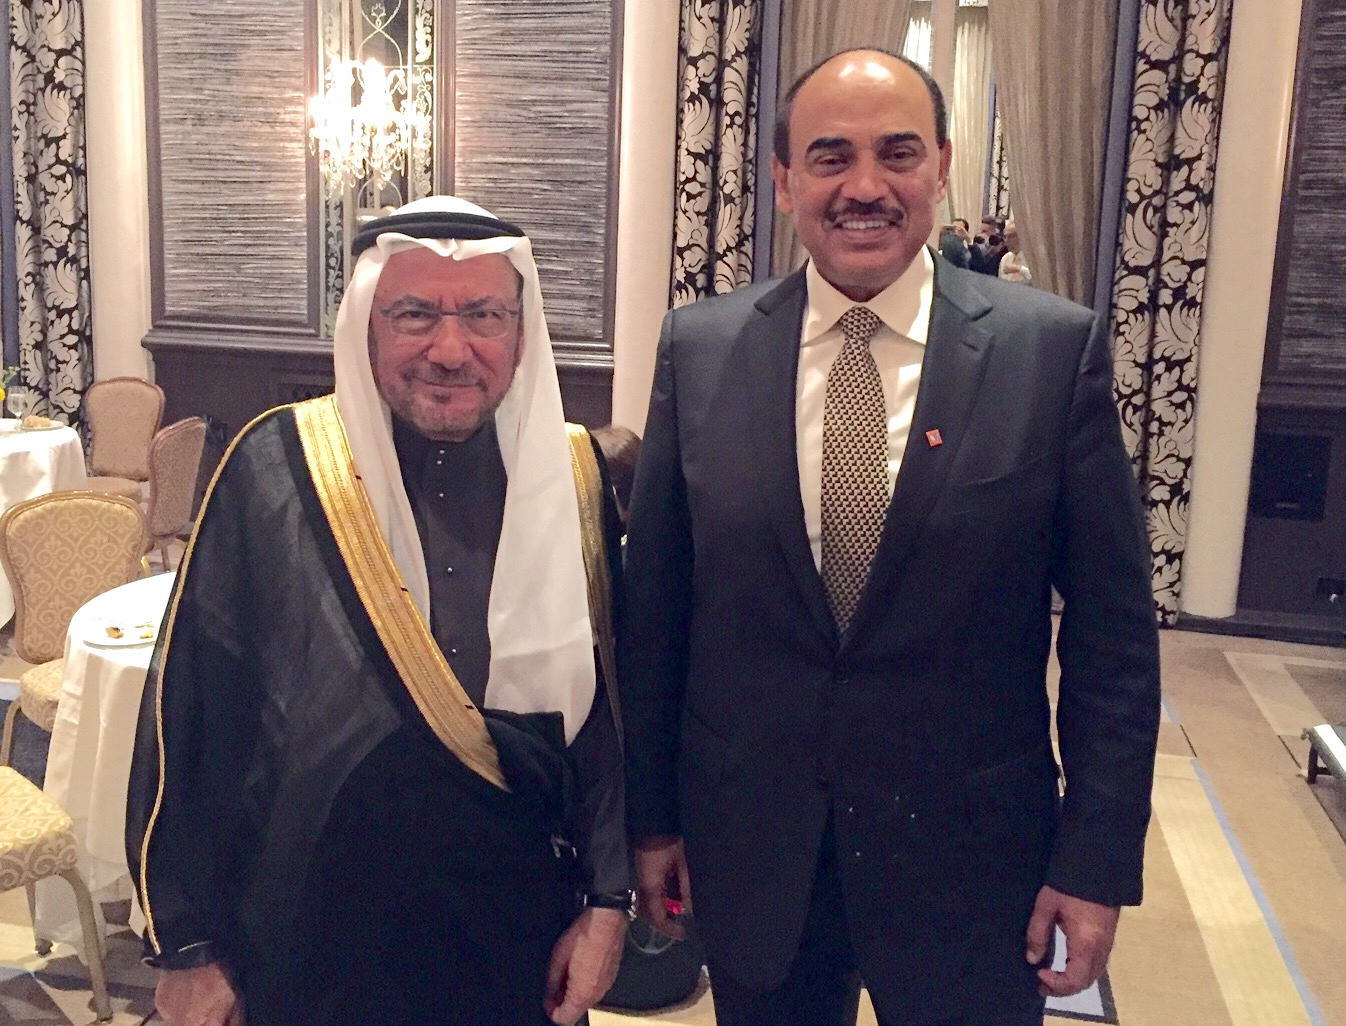 First Deputy Prime Minister and Minister of Foreign Affairs Sheikh Sabah Al-Khaled Al-Hamad Al-Sabah and Organization of Islamic Cooperation's (OIC) Secretary General Iyad Ameen Madani